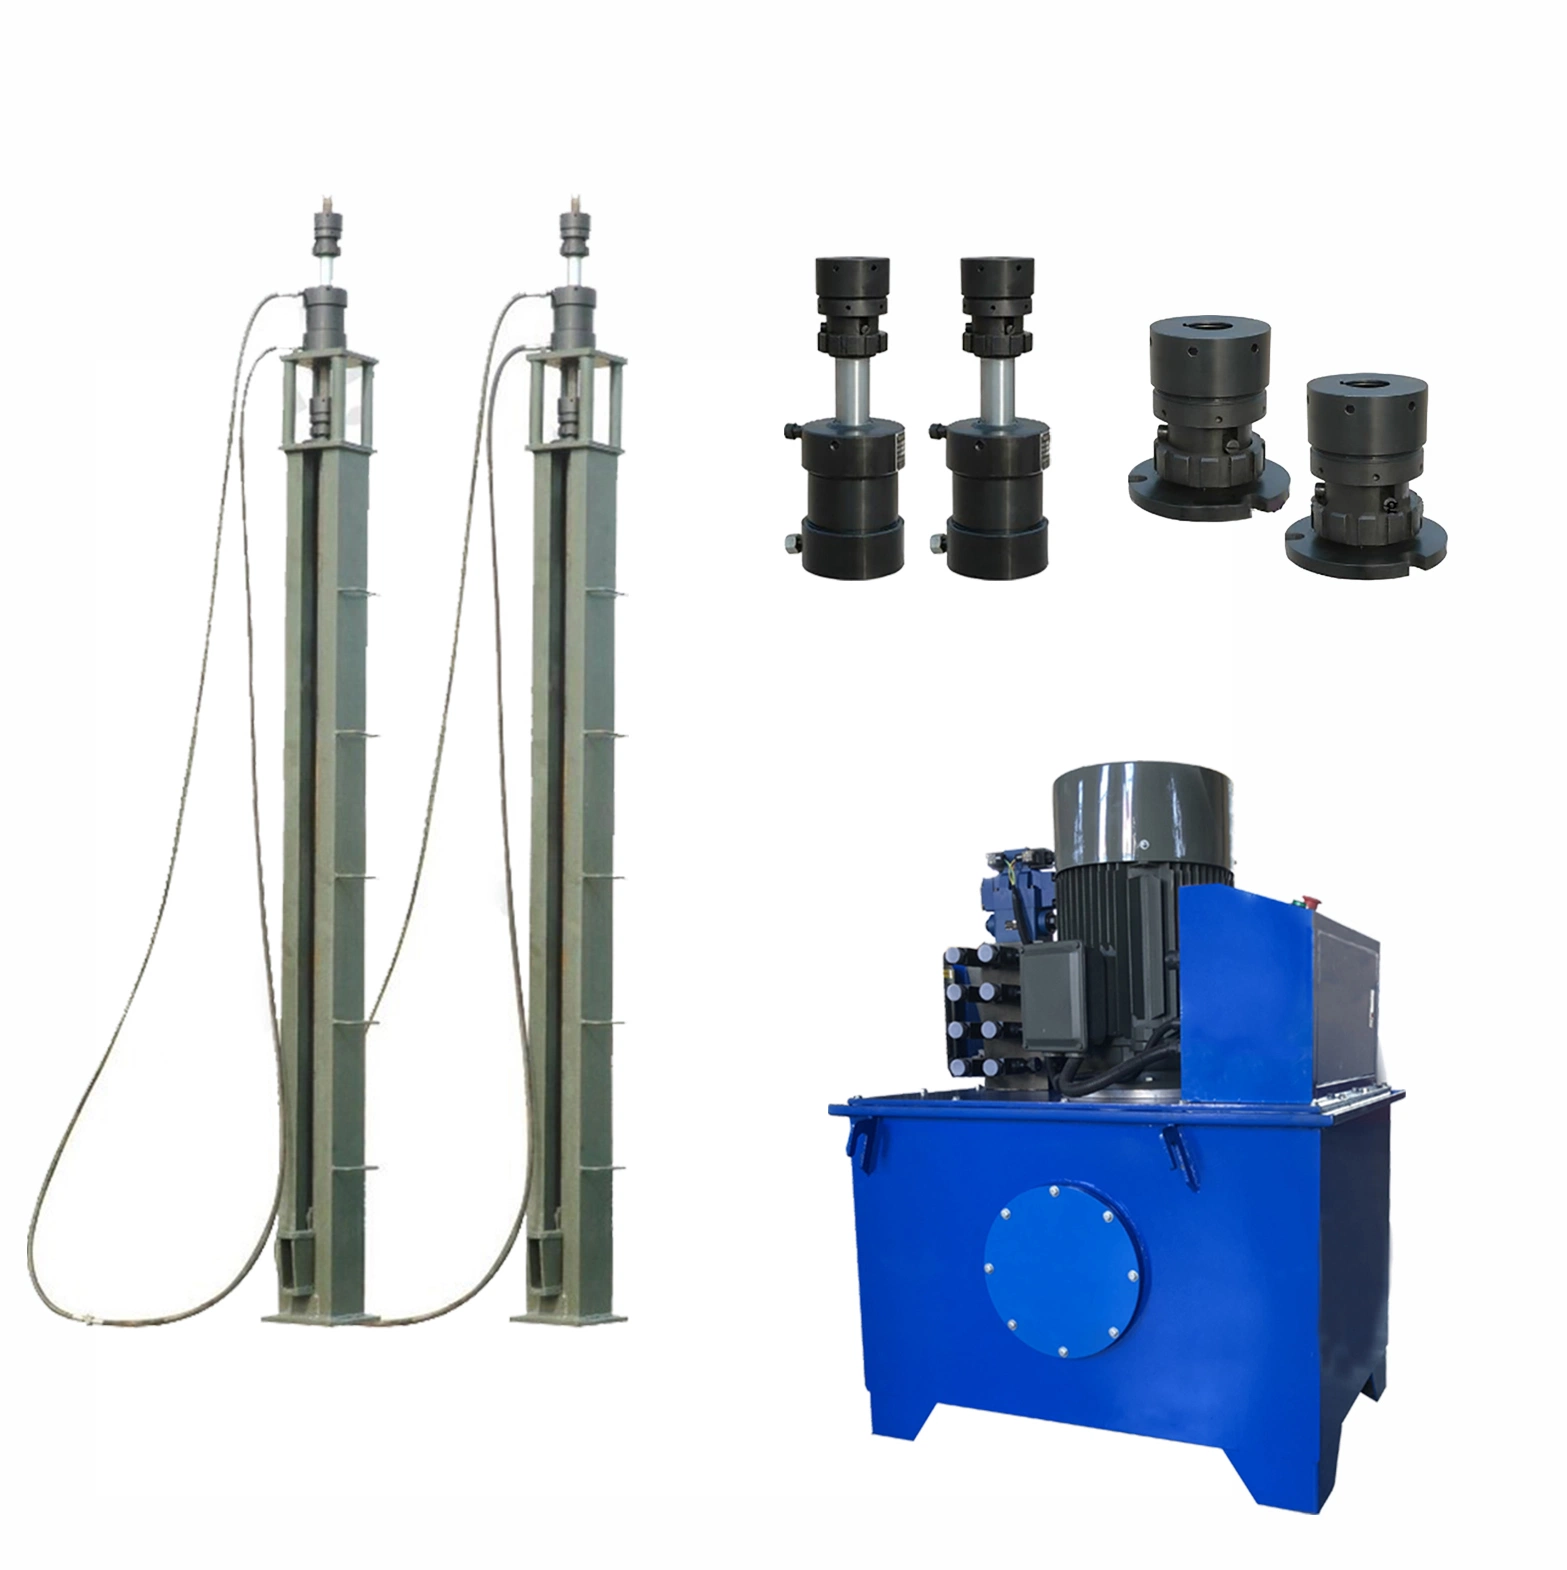 Chuck Type Hydraulic Tank Jacking System to Lifting Tank Wall with Cylinder Pump Station